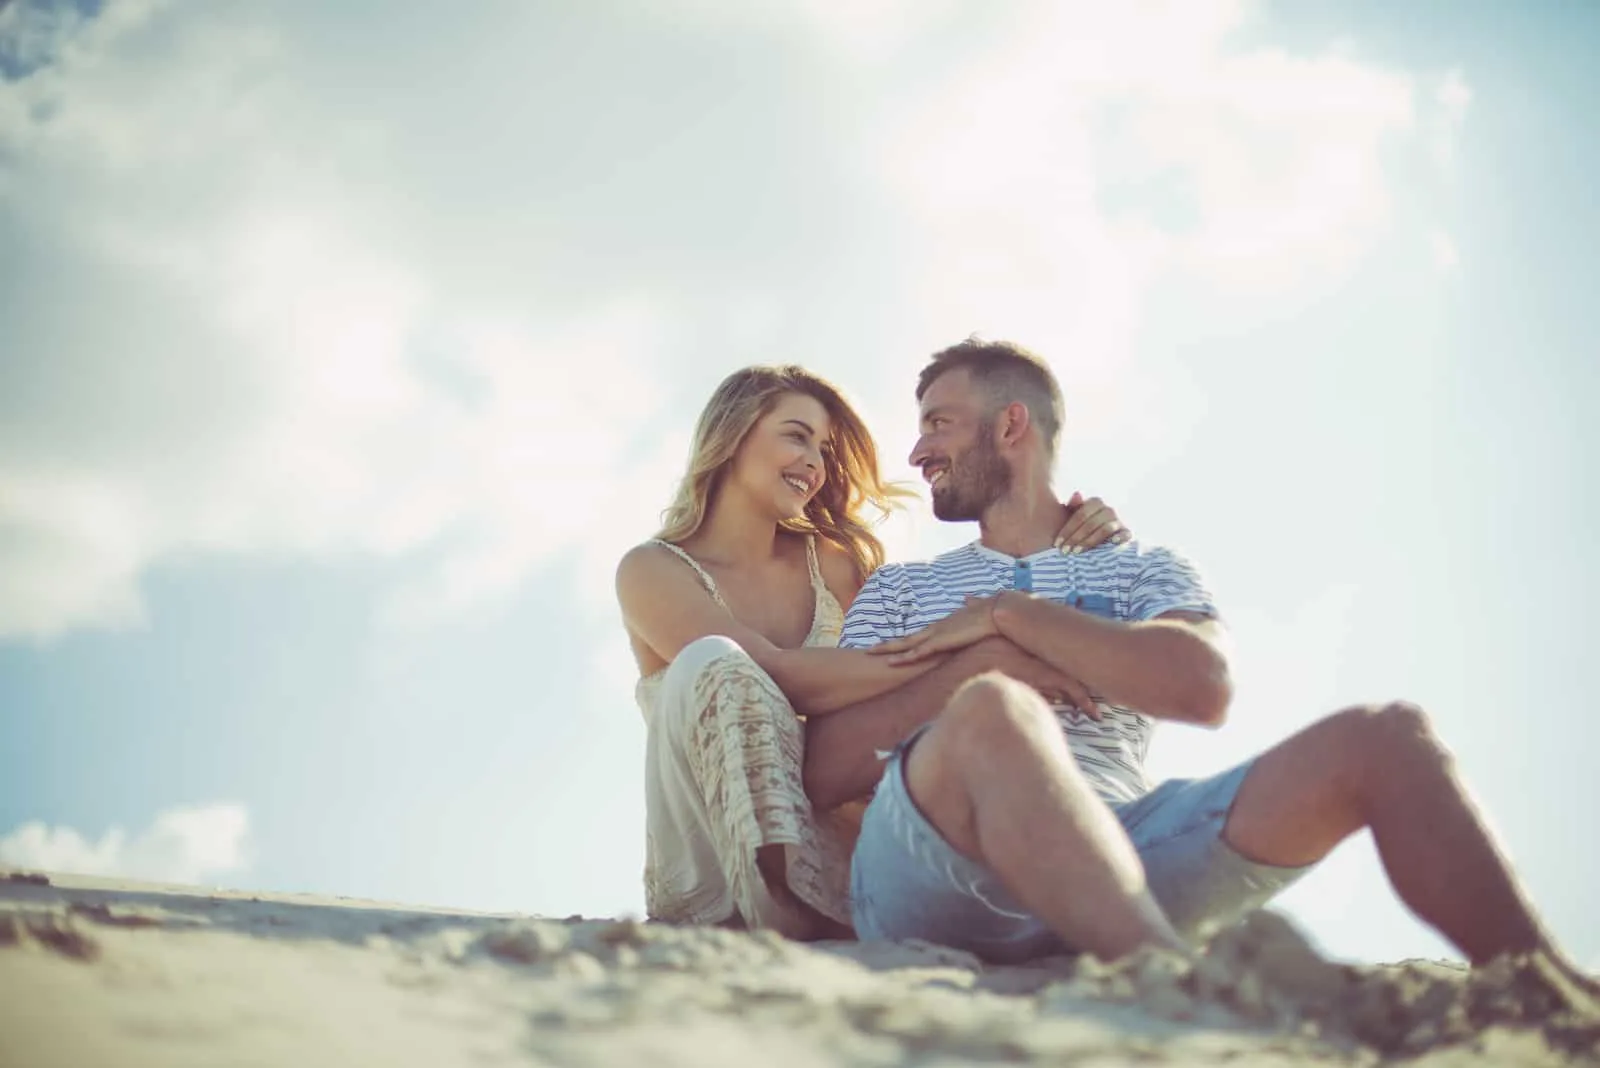 a smiling man and woman embracing sitting on the beach